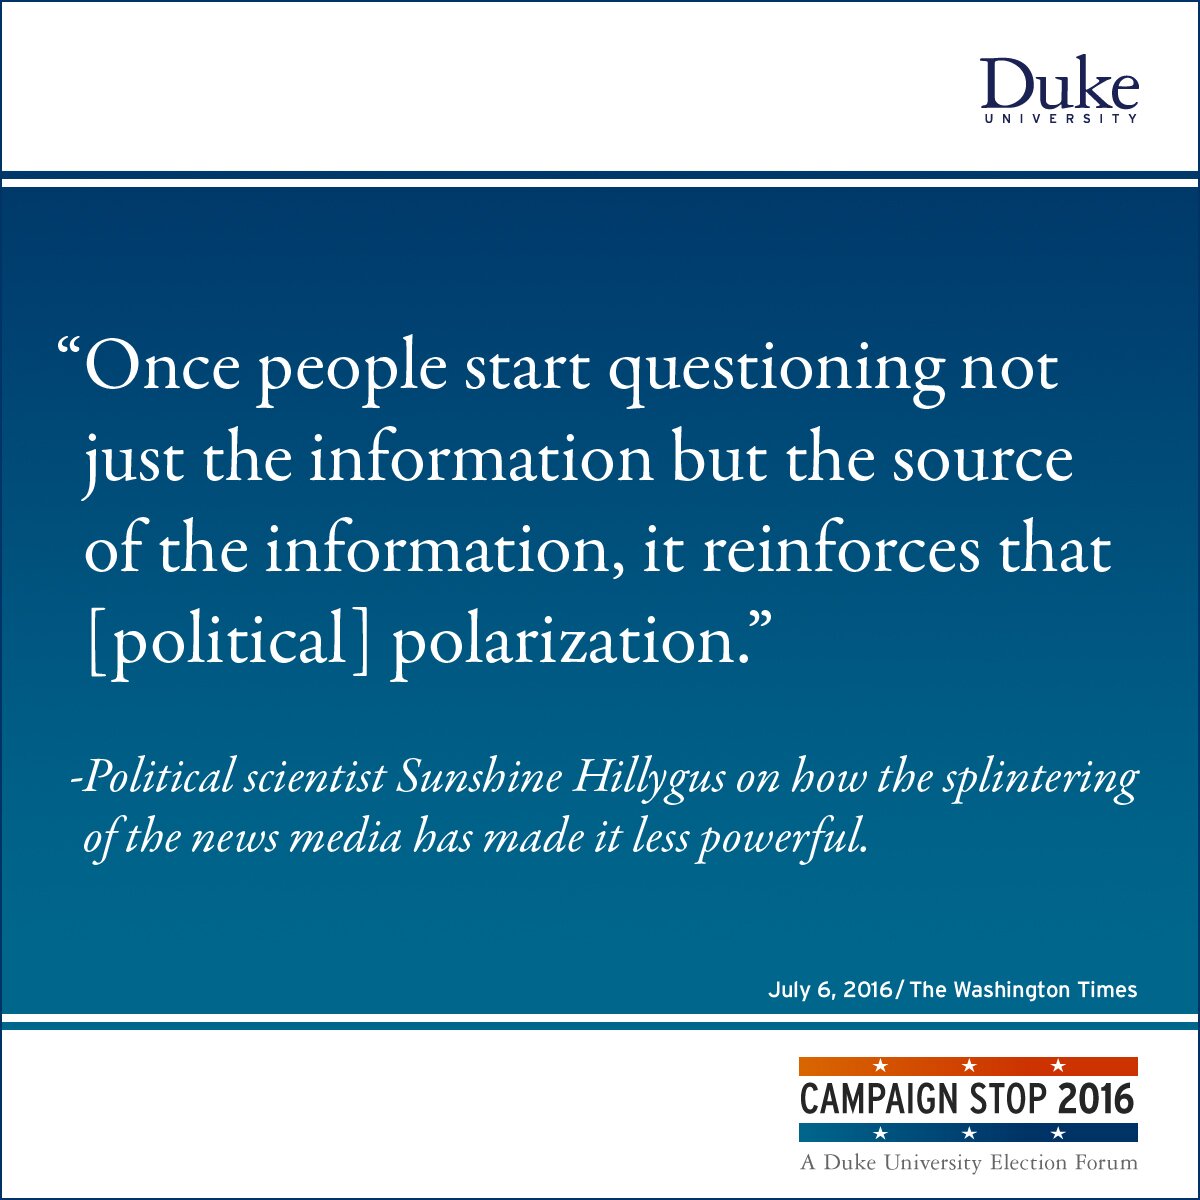 “Once people start questioning not just the information but the source of the information, it reinforces that [political] polarization.” -Political scientist Sunshine Hillygus on how the splintering of the news media has made it less powerful.